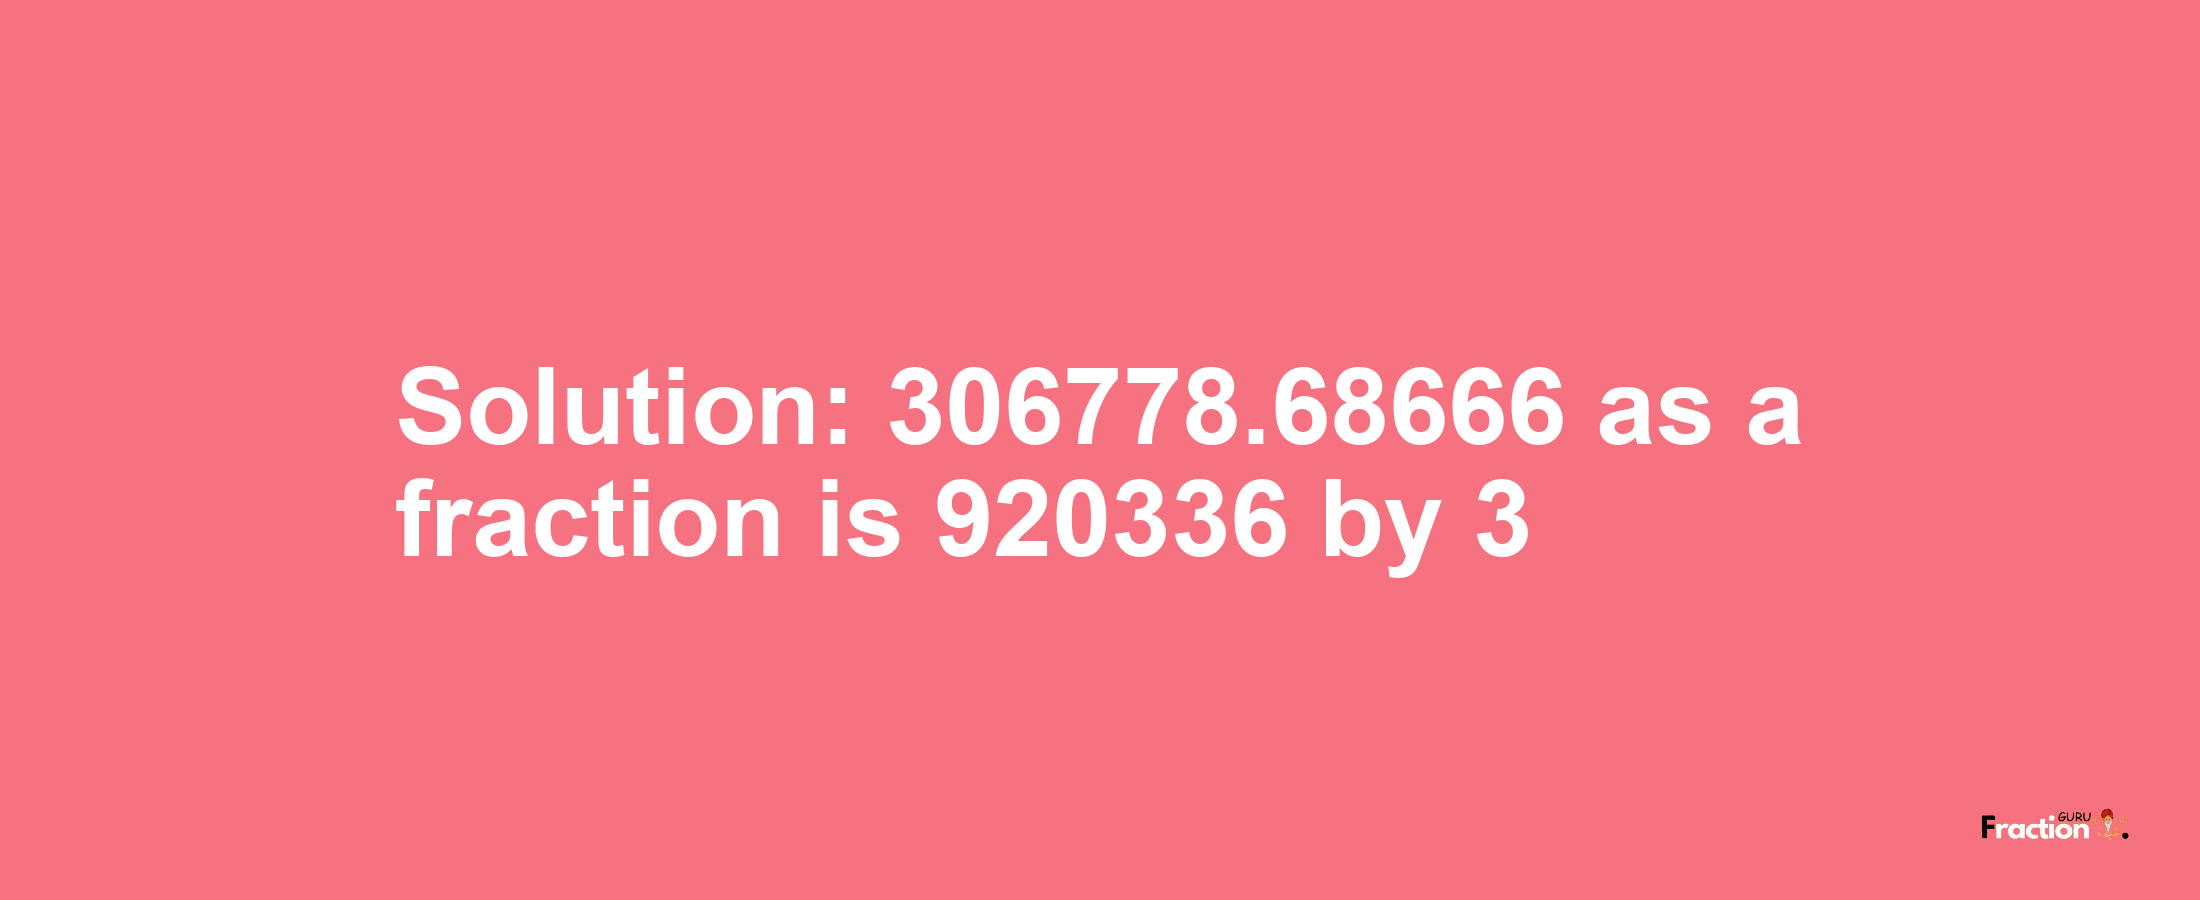 Solution:306778.68666 as a fraction is 920336/3